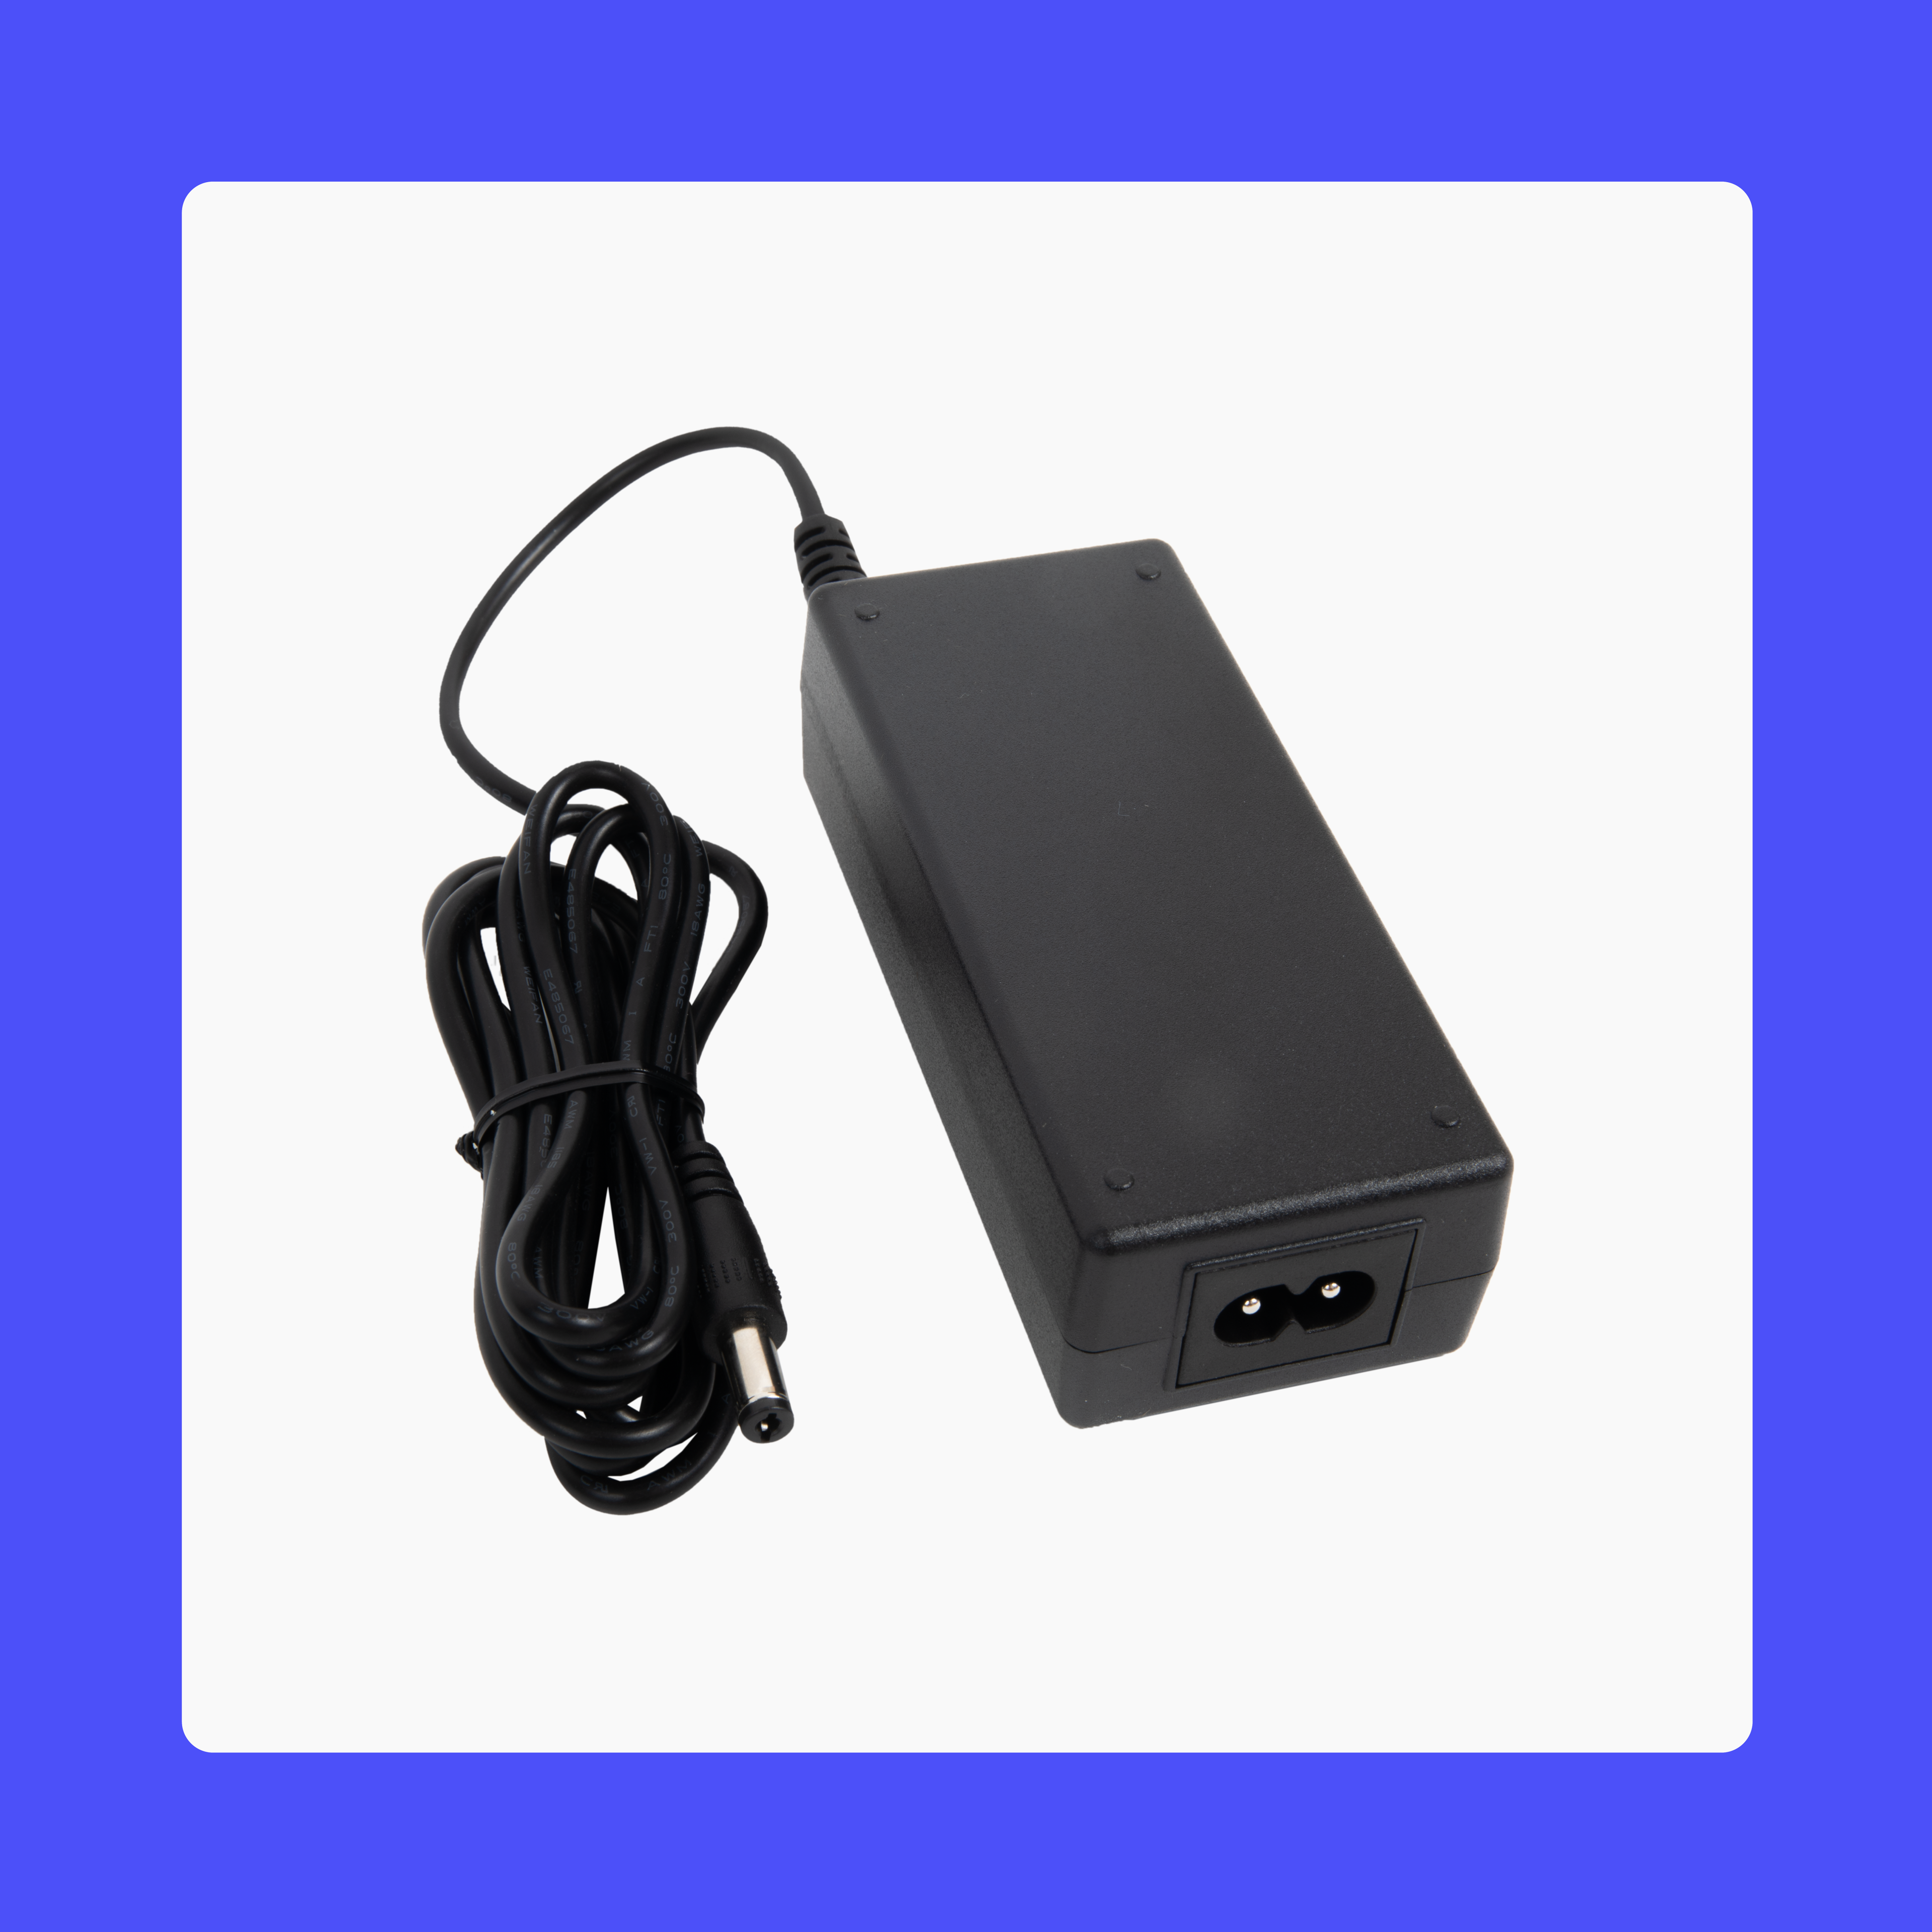 product | accessory | replacement power supply | purple background